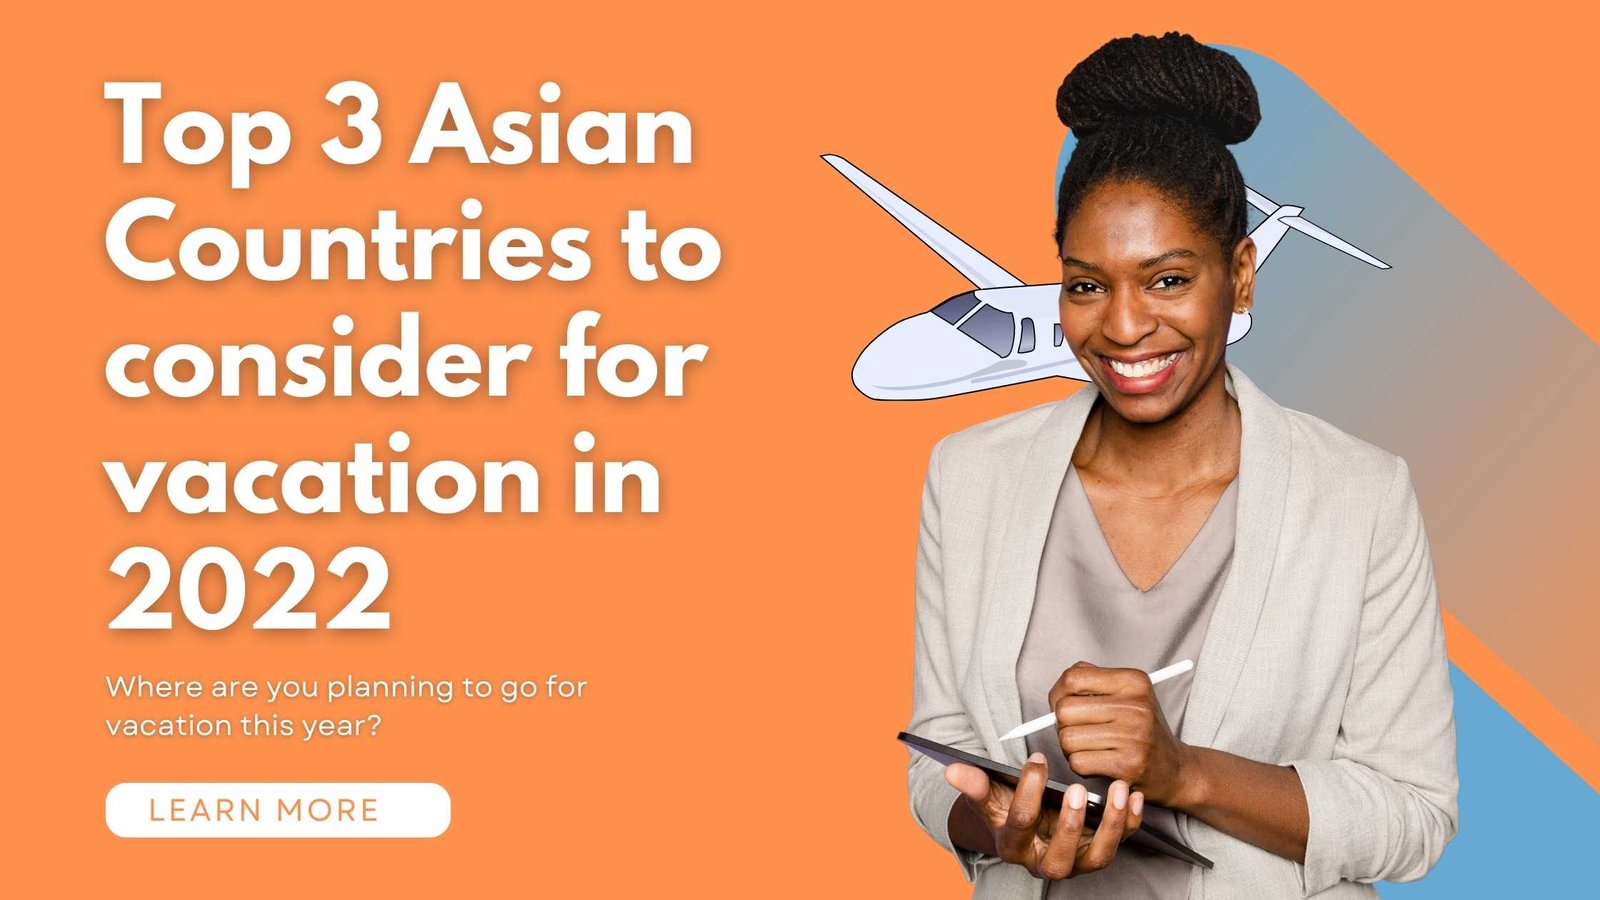 Top 3 Asian countries to consider for vacation in 2022